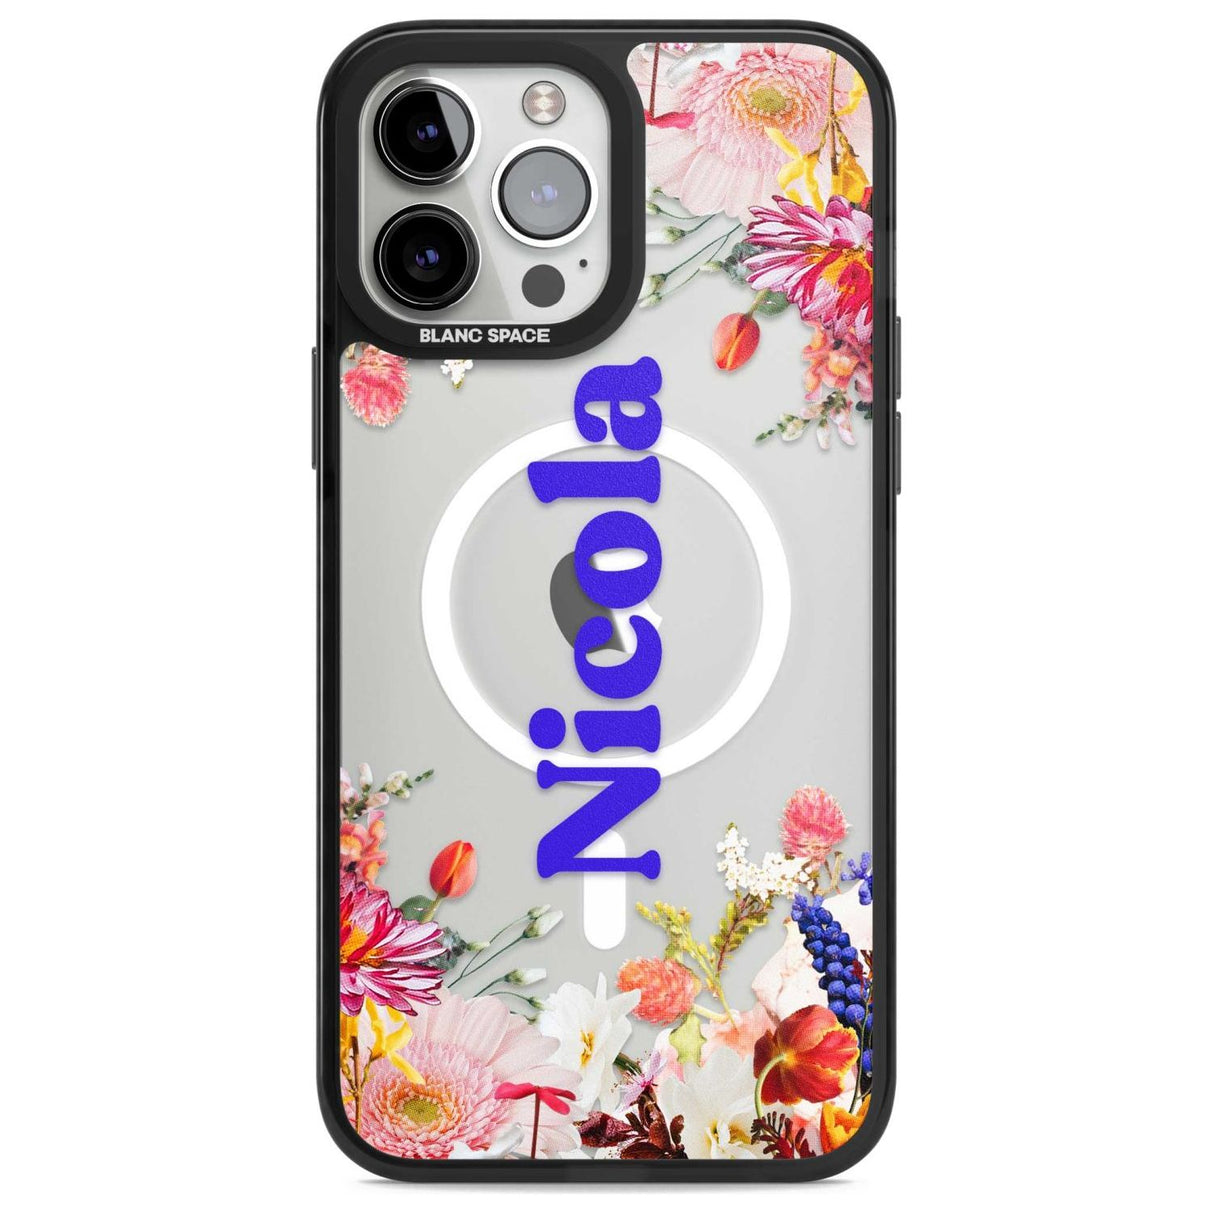 Personalised Text with Floral Borders Custom Phone Case iPhone 13 Pro Max / Magsafe Black Impact Case Blanc Space